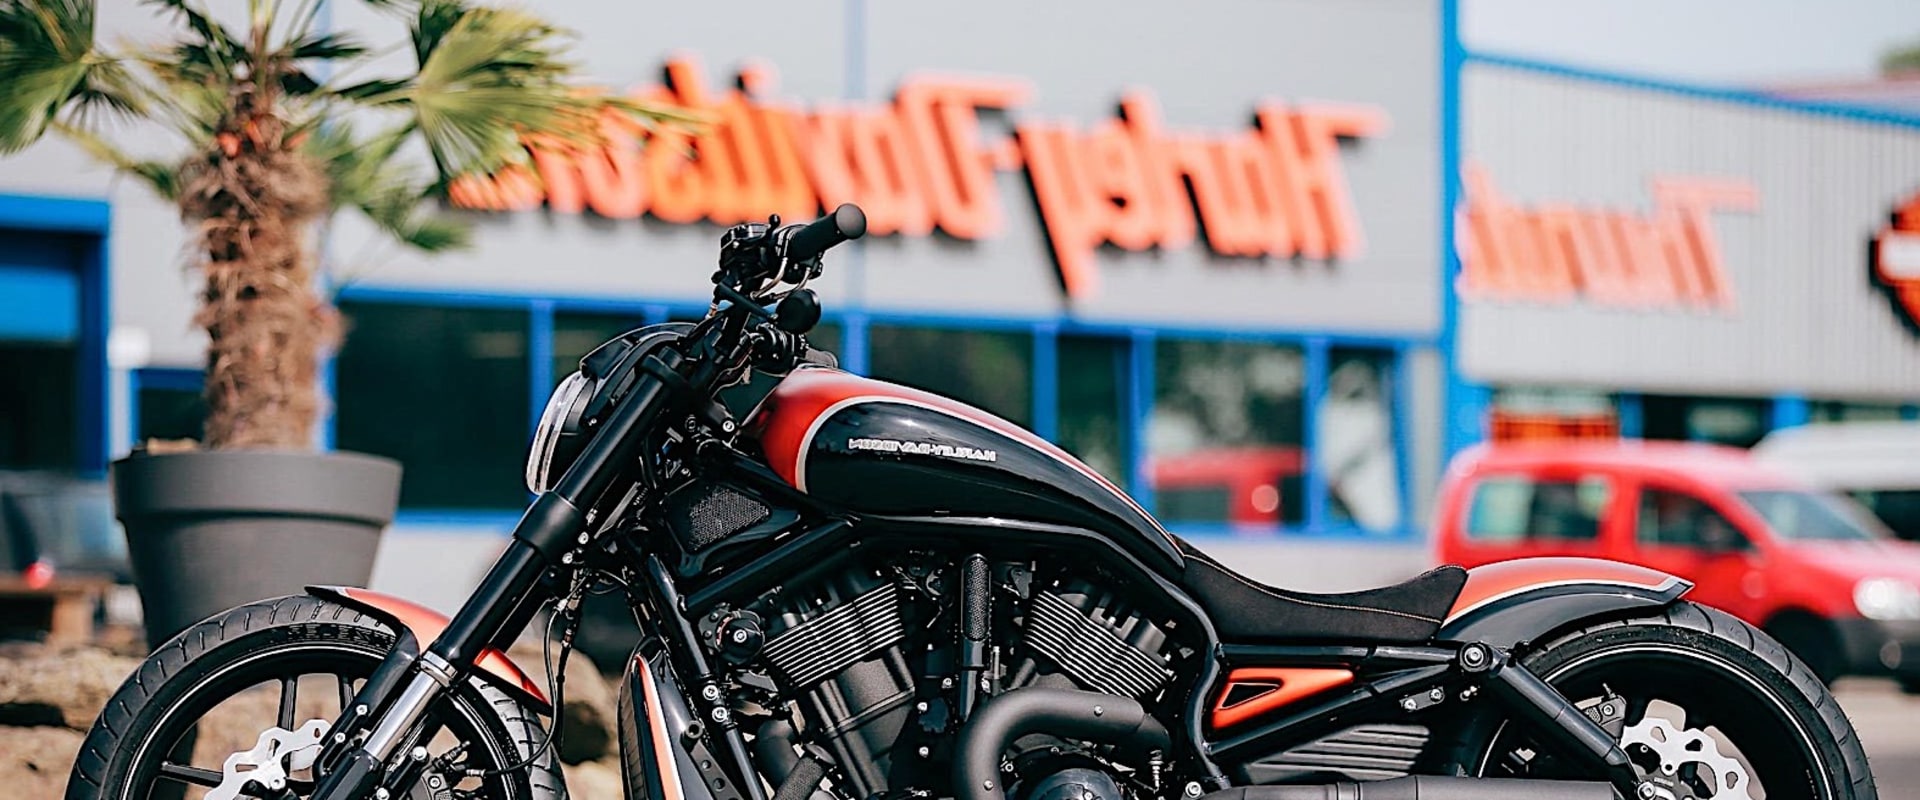 The History and Legacy of Harley Davidson